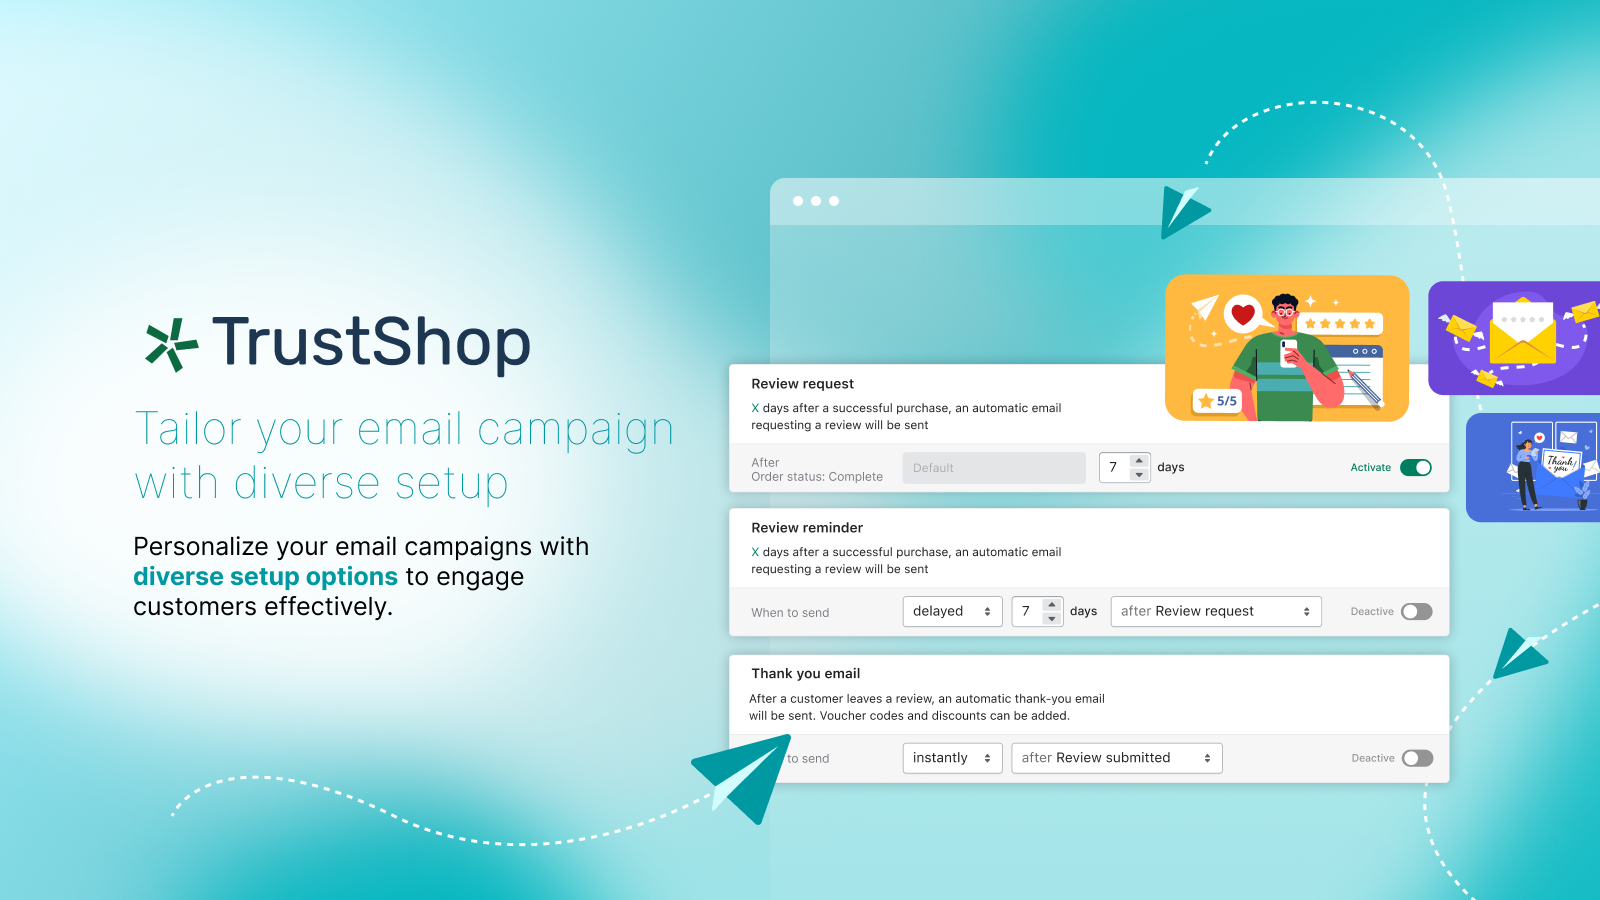 Tailor your email campaign with diverse setup